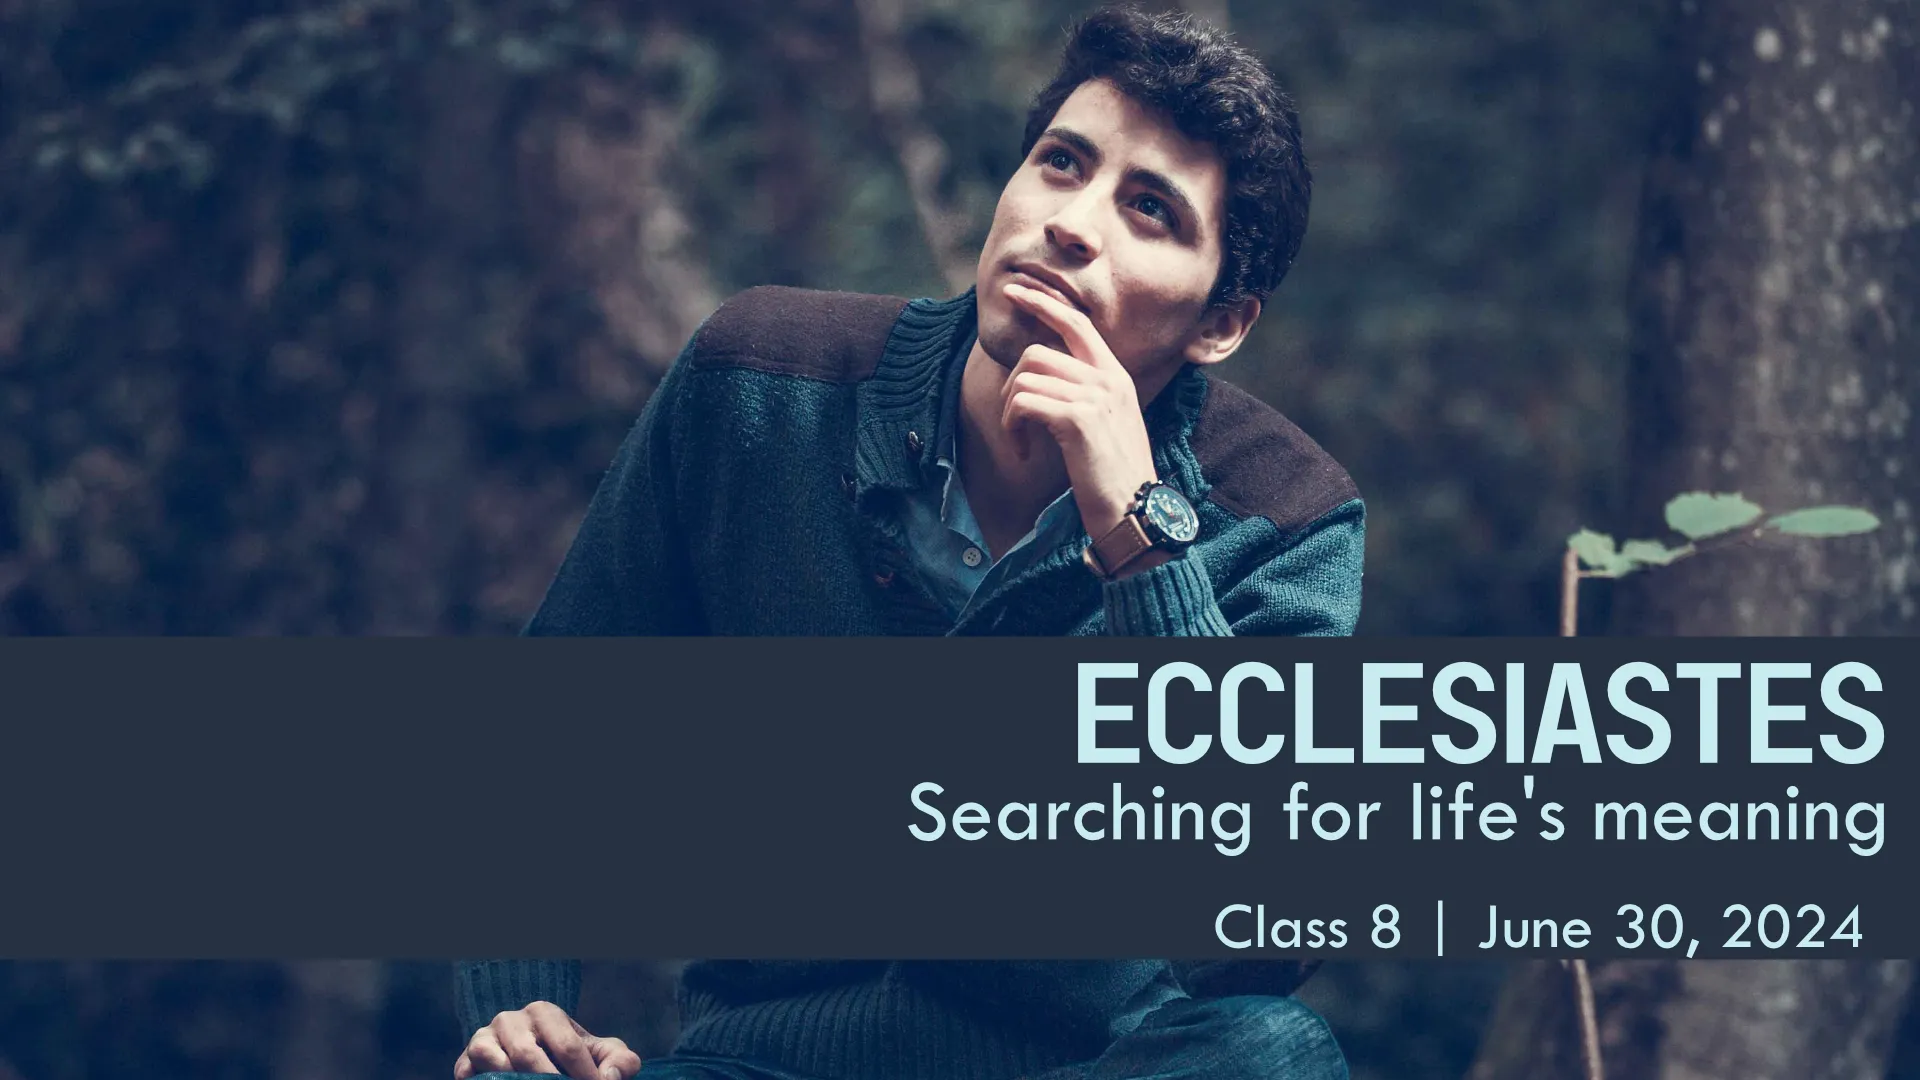 Ecclesiastes: Searching for life's meaning | Class 8